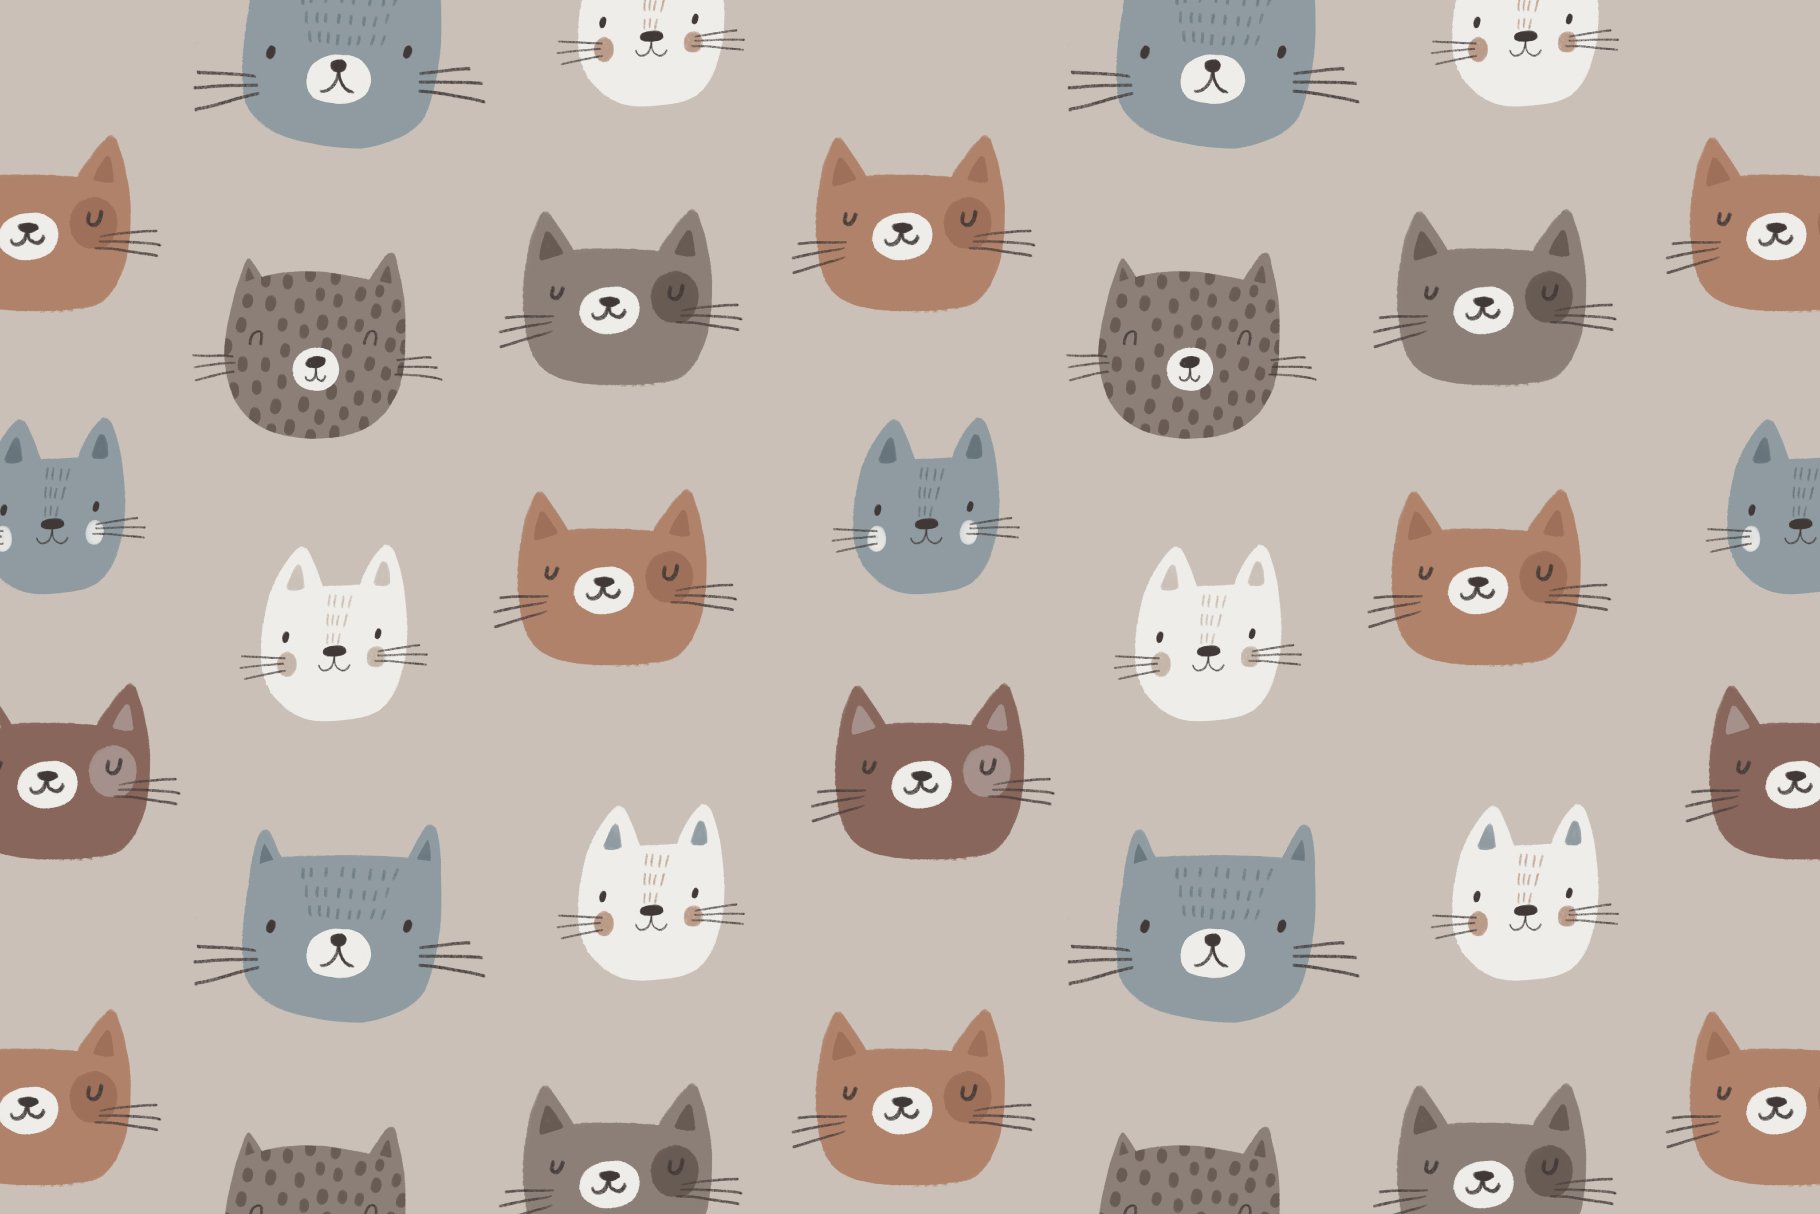 Pastel cats for your cute project.